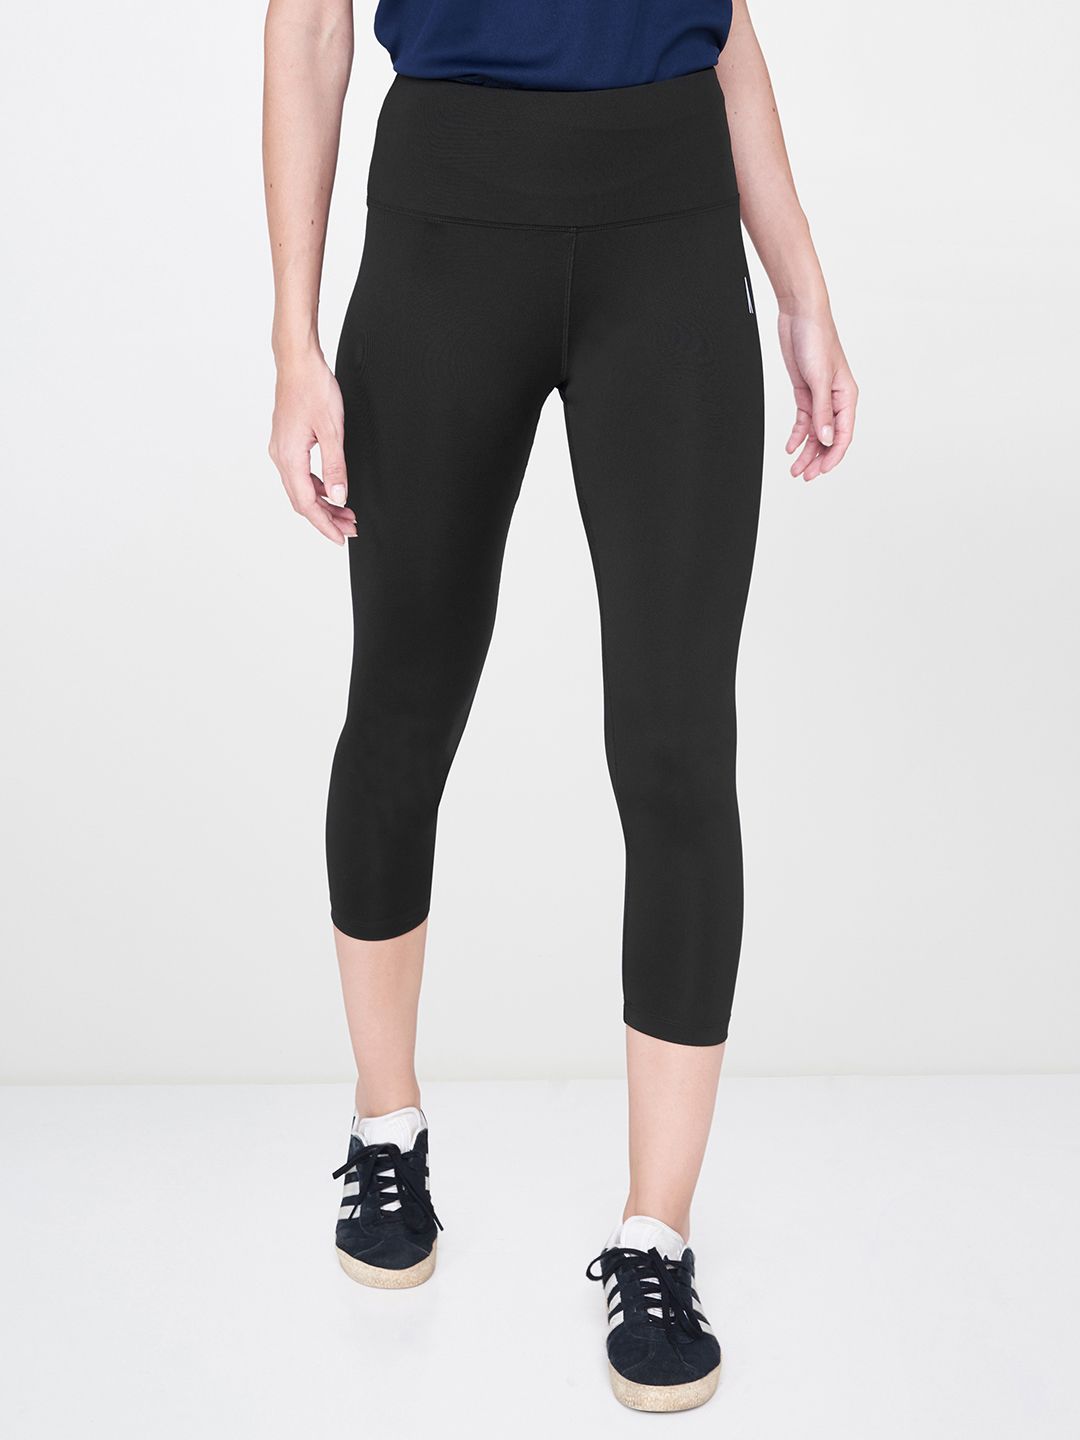 AND Women Black Solid Knitted Cropped Activewear Tights Price in India